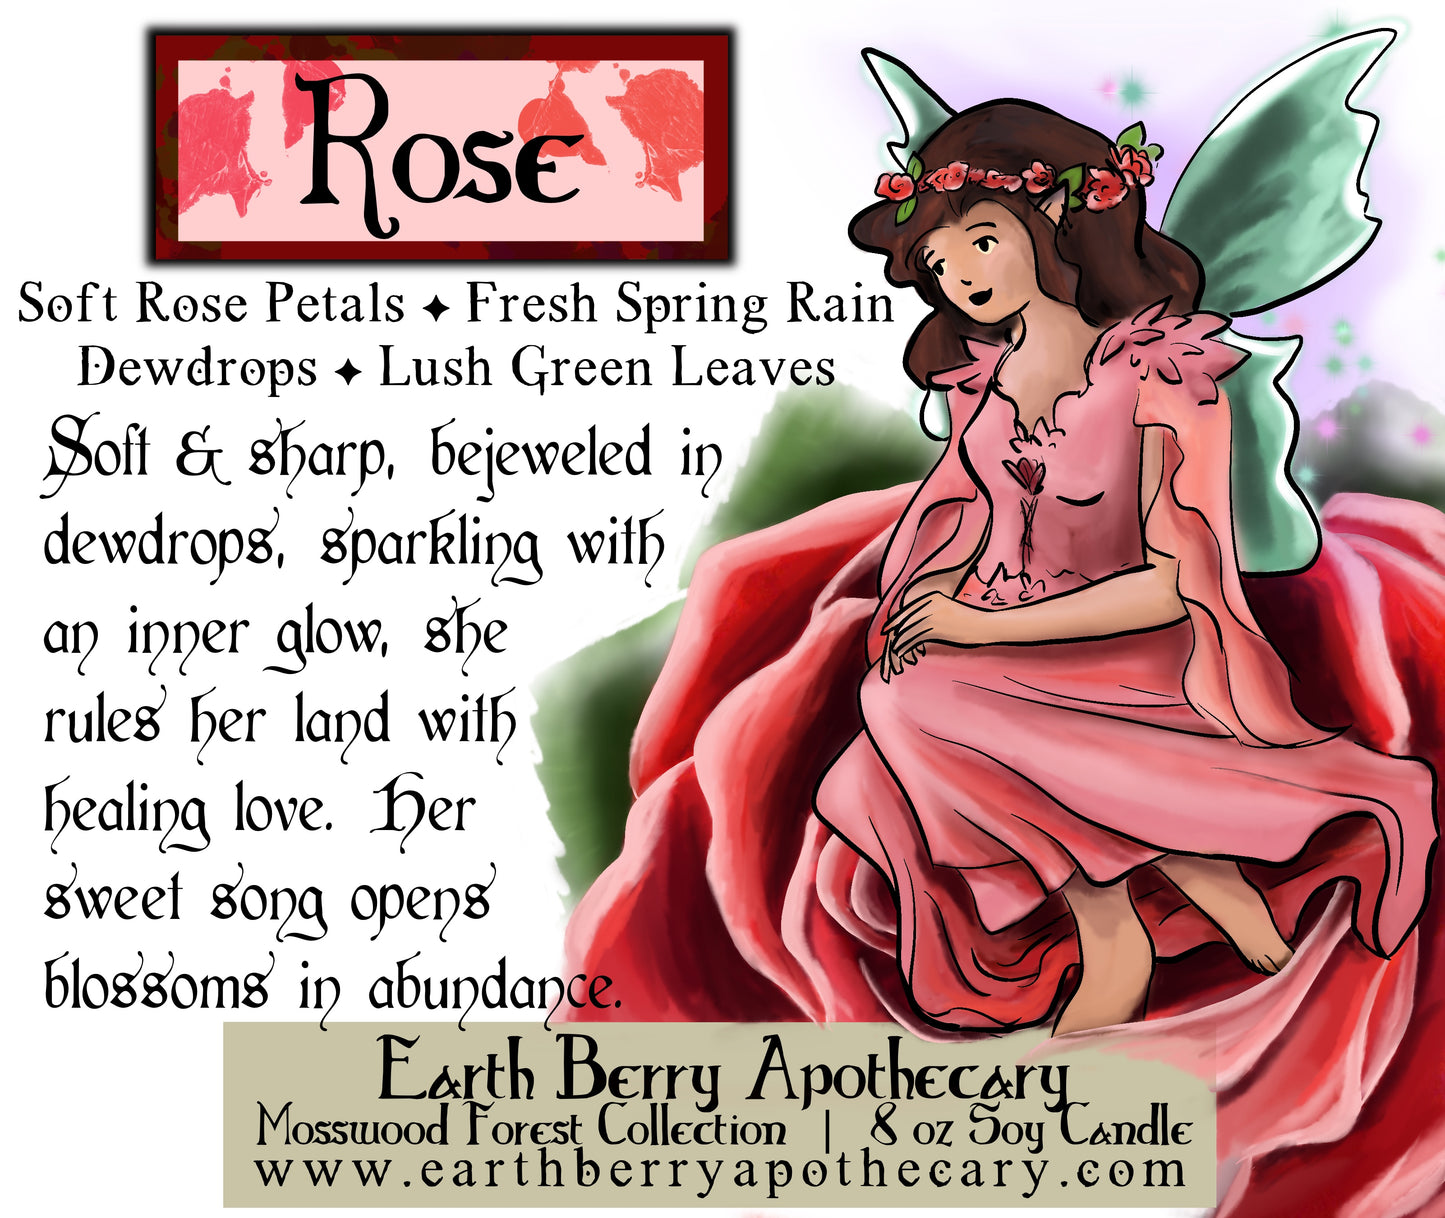 Rose scented flower fairy soy candle with a fairy wearing a beautiful pink dress.